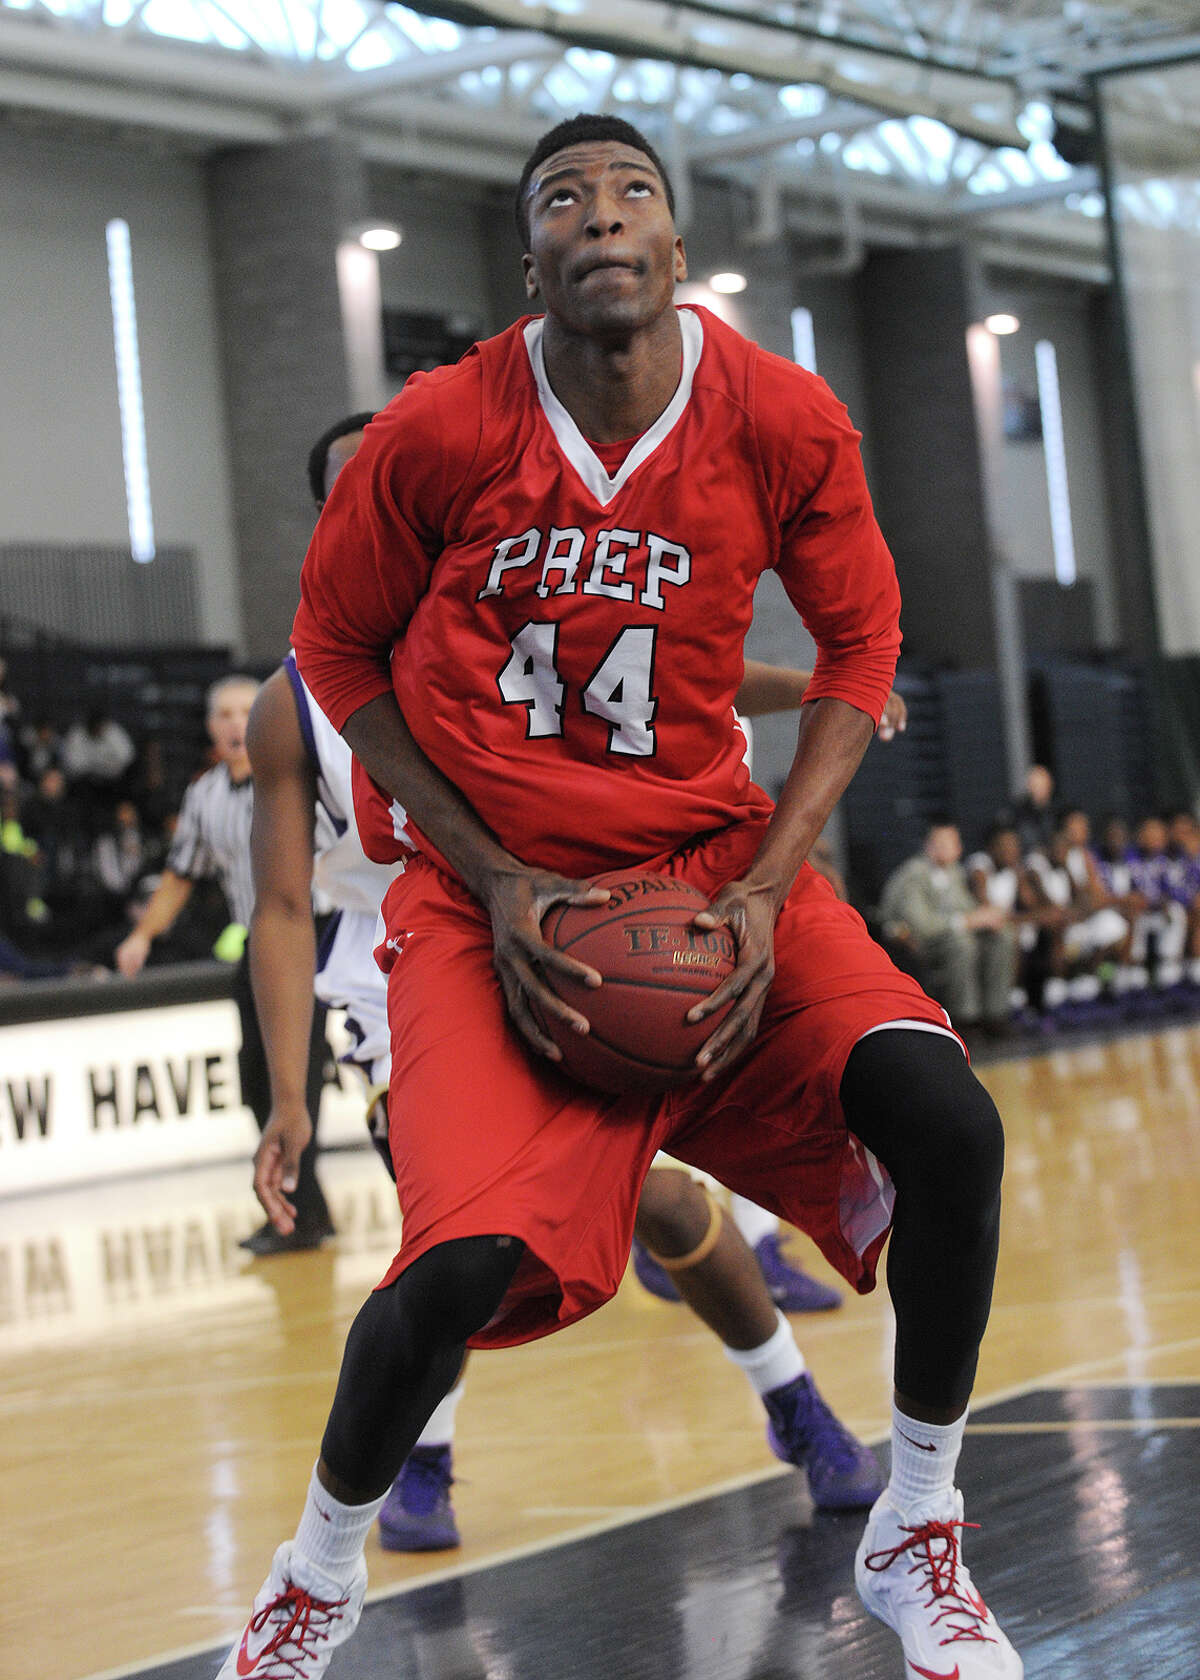 (4) The power of Pascal. Pascal Chukwu had a monster game in Fairfield Prep's 70-58 win over Hillhouse on Friday. The dominating center finished with a a game high in points (24) and blocked shots (9). He also pulled down nine rebounds.